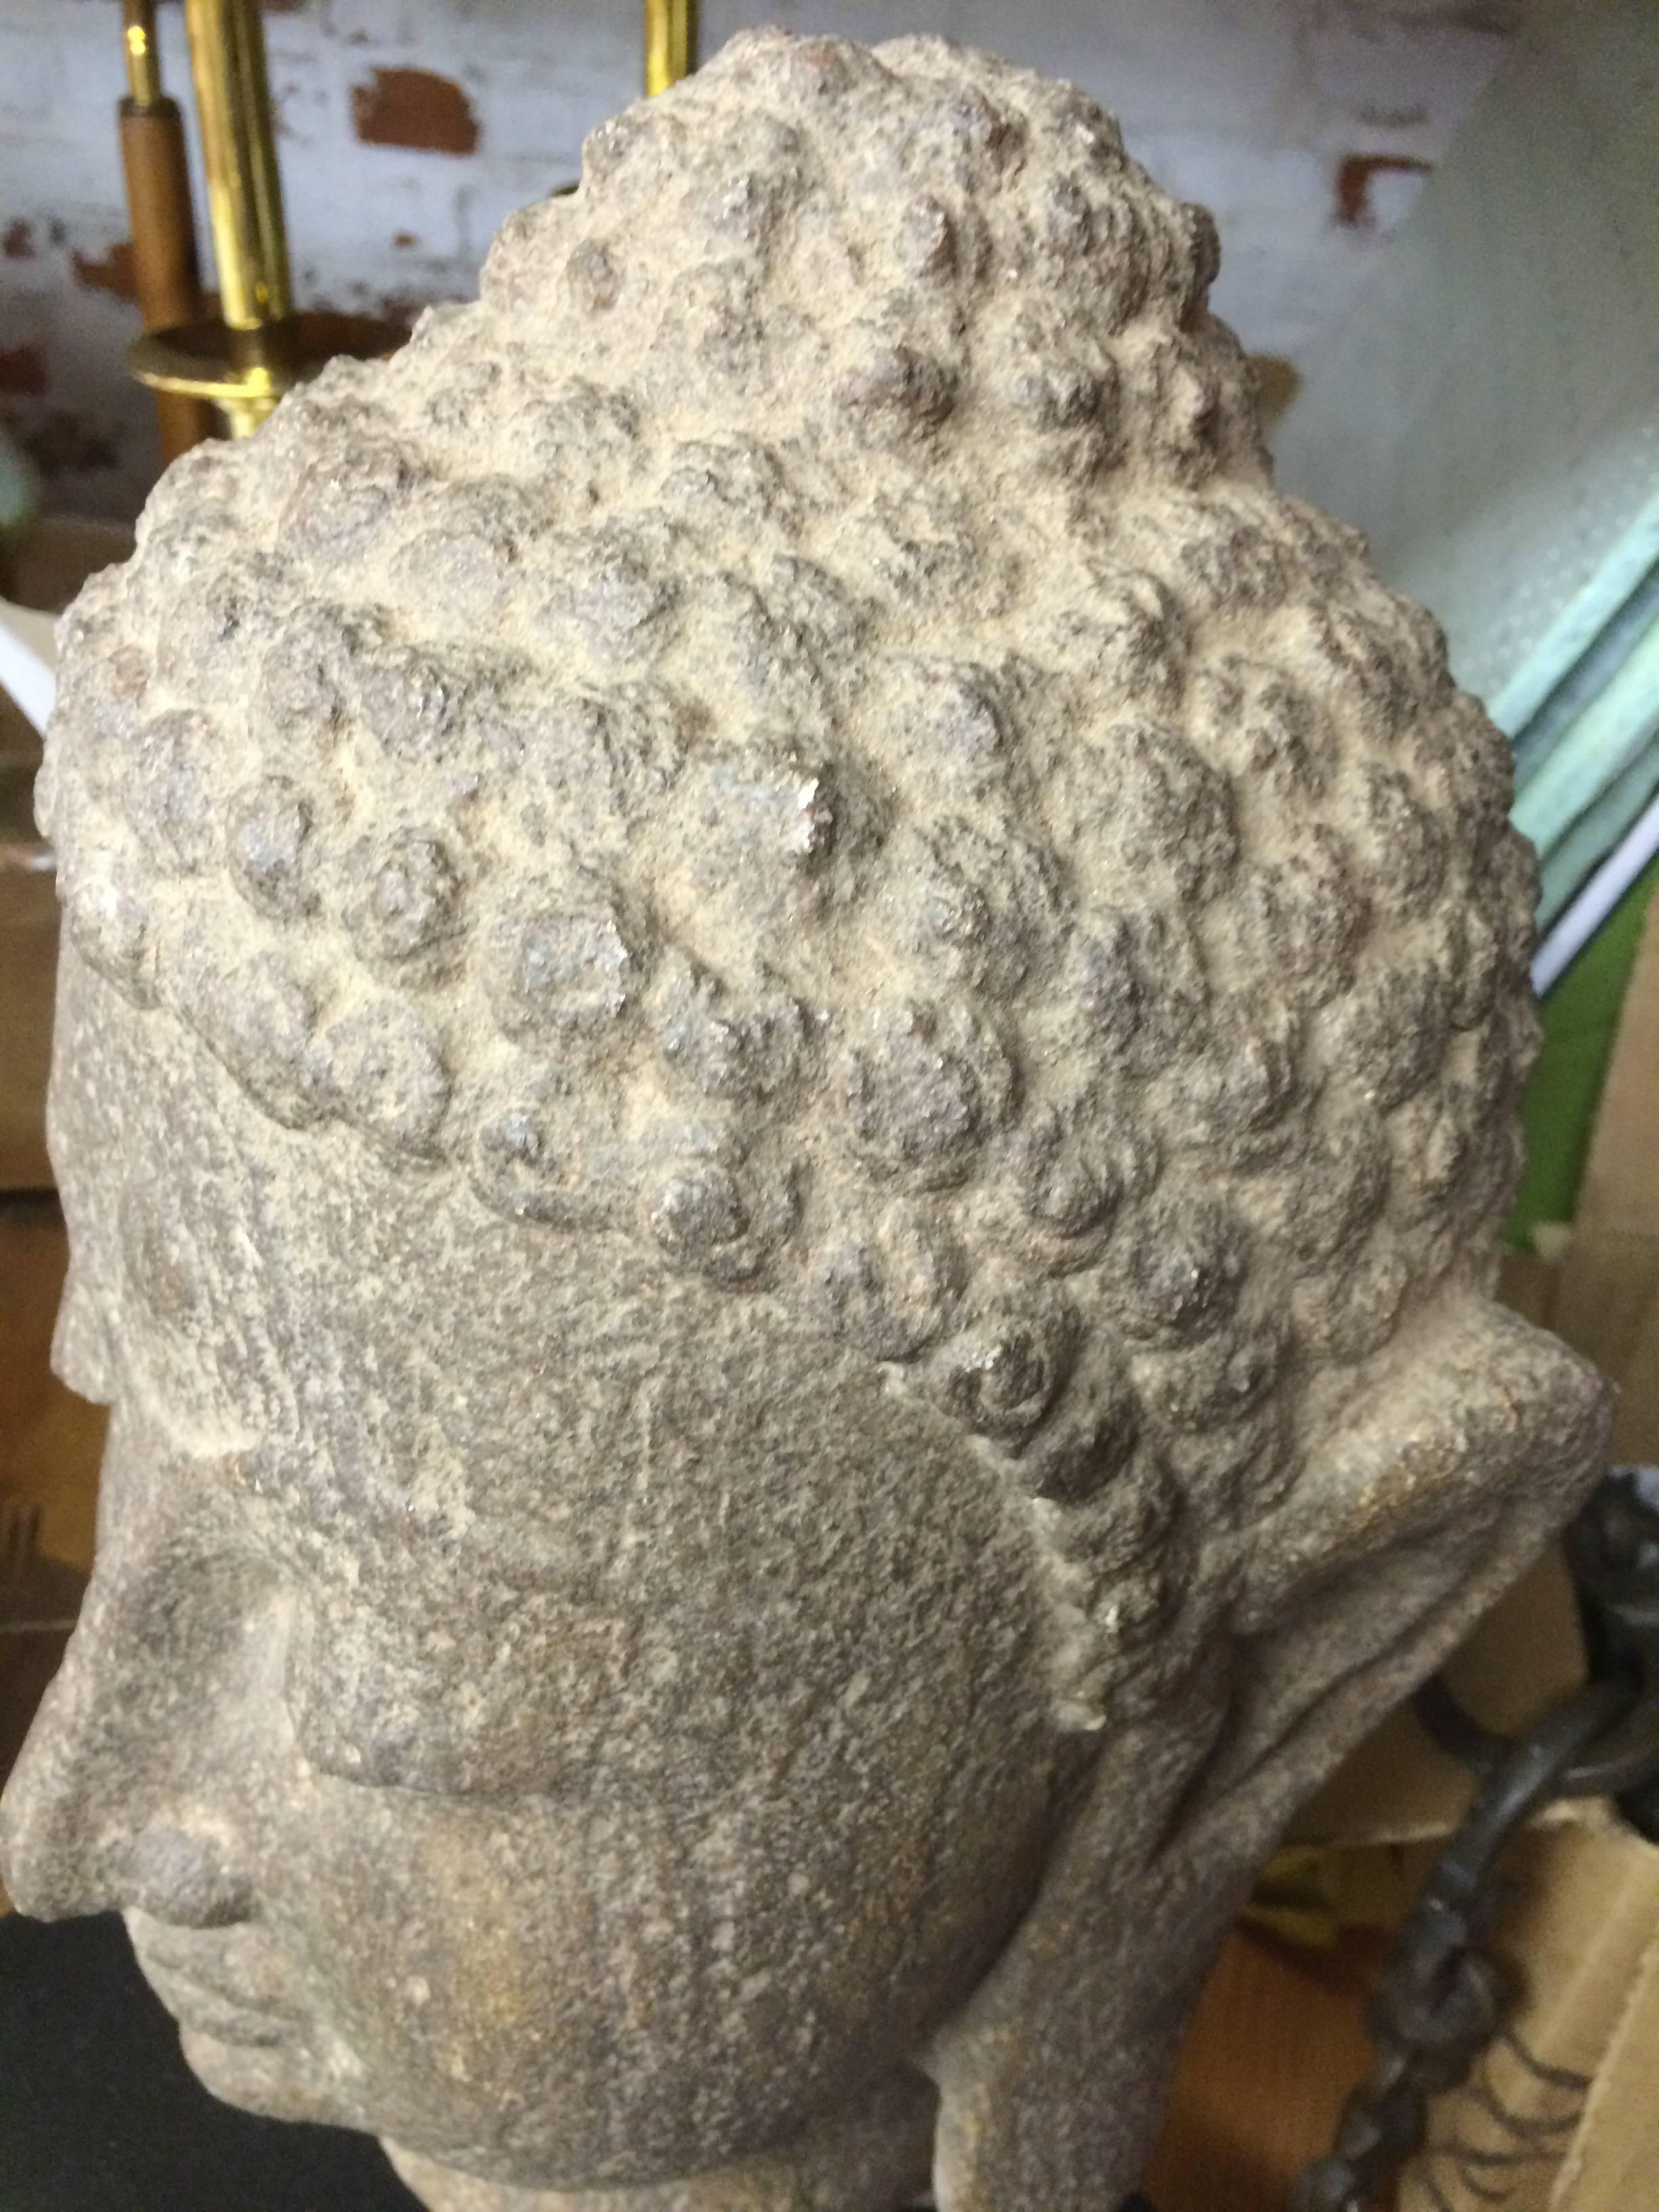 A beautiful Buddha head made of granite dating from the 19th Century. Features include the typical curled hair, elongated ears and half-closed eyes. The Ushnisha crown depicts the wisdom and illumination after attaining enlightenment. In excellent